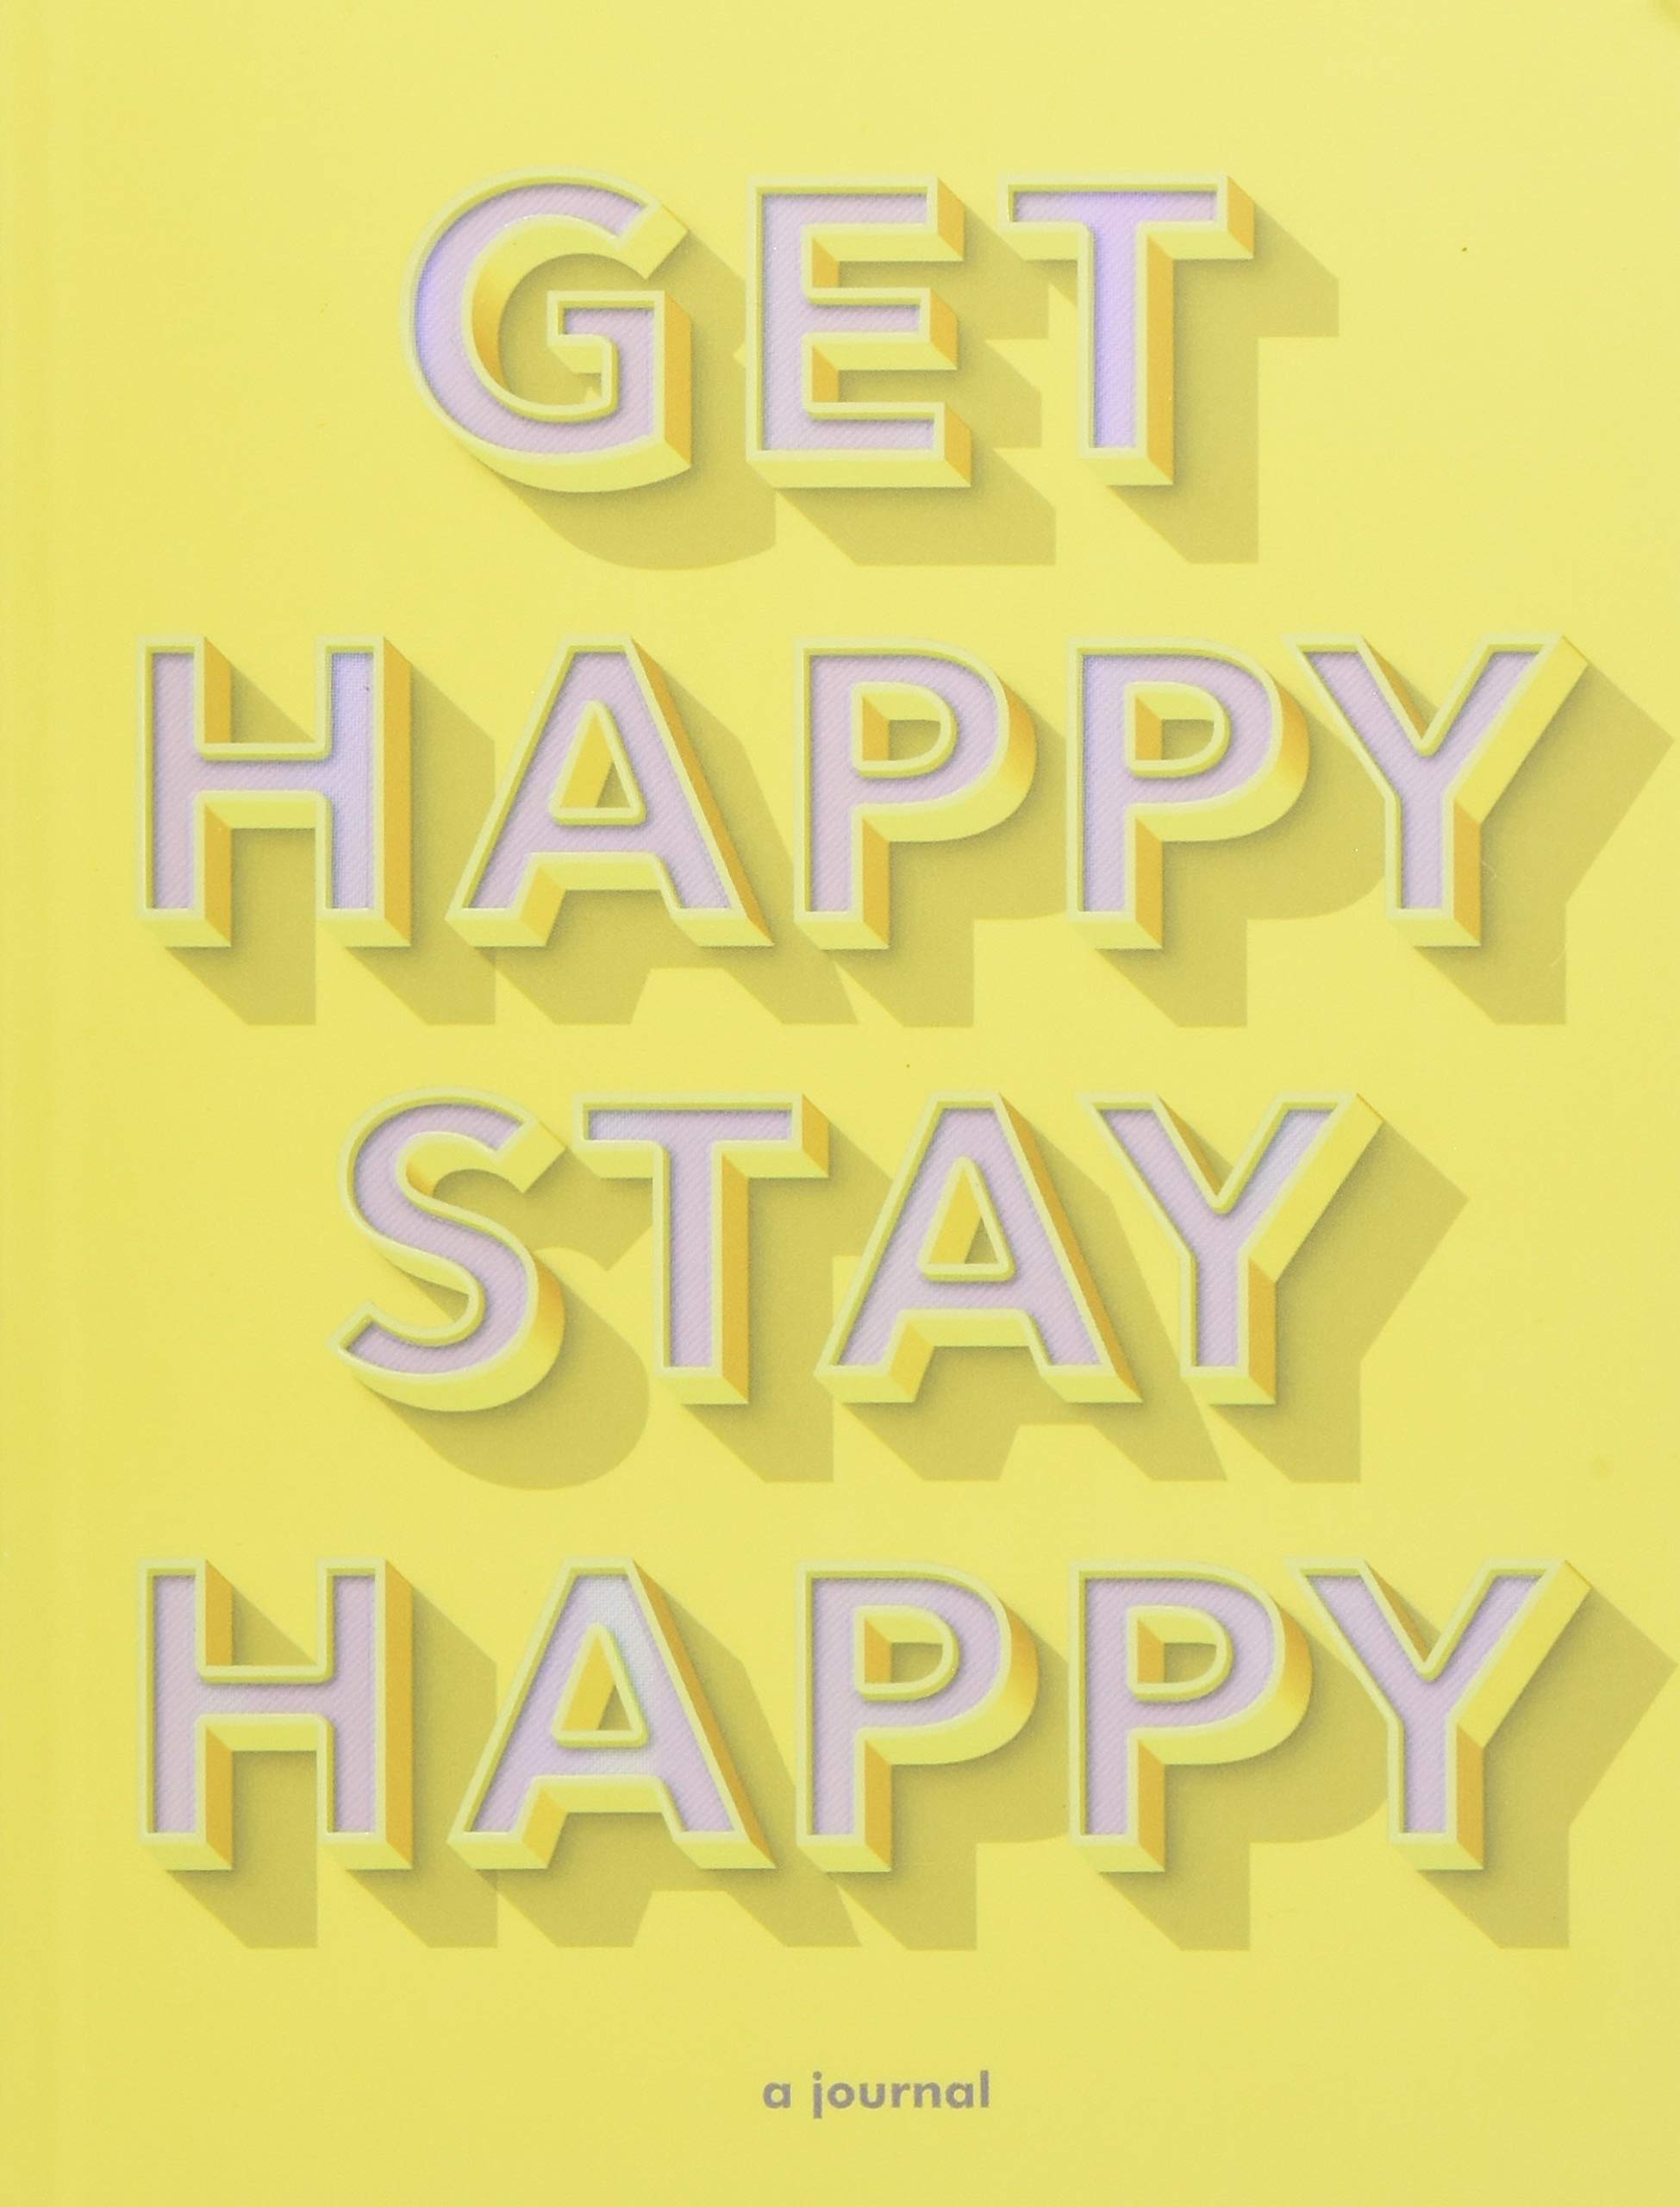 Get Happy, Stay Happy